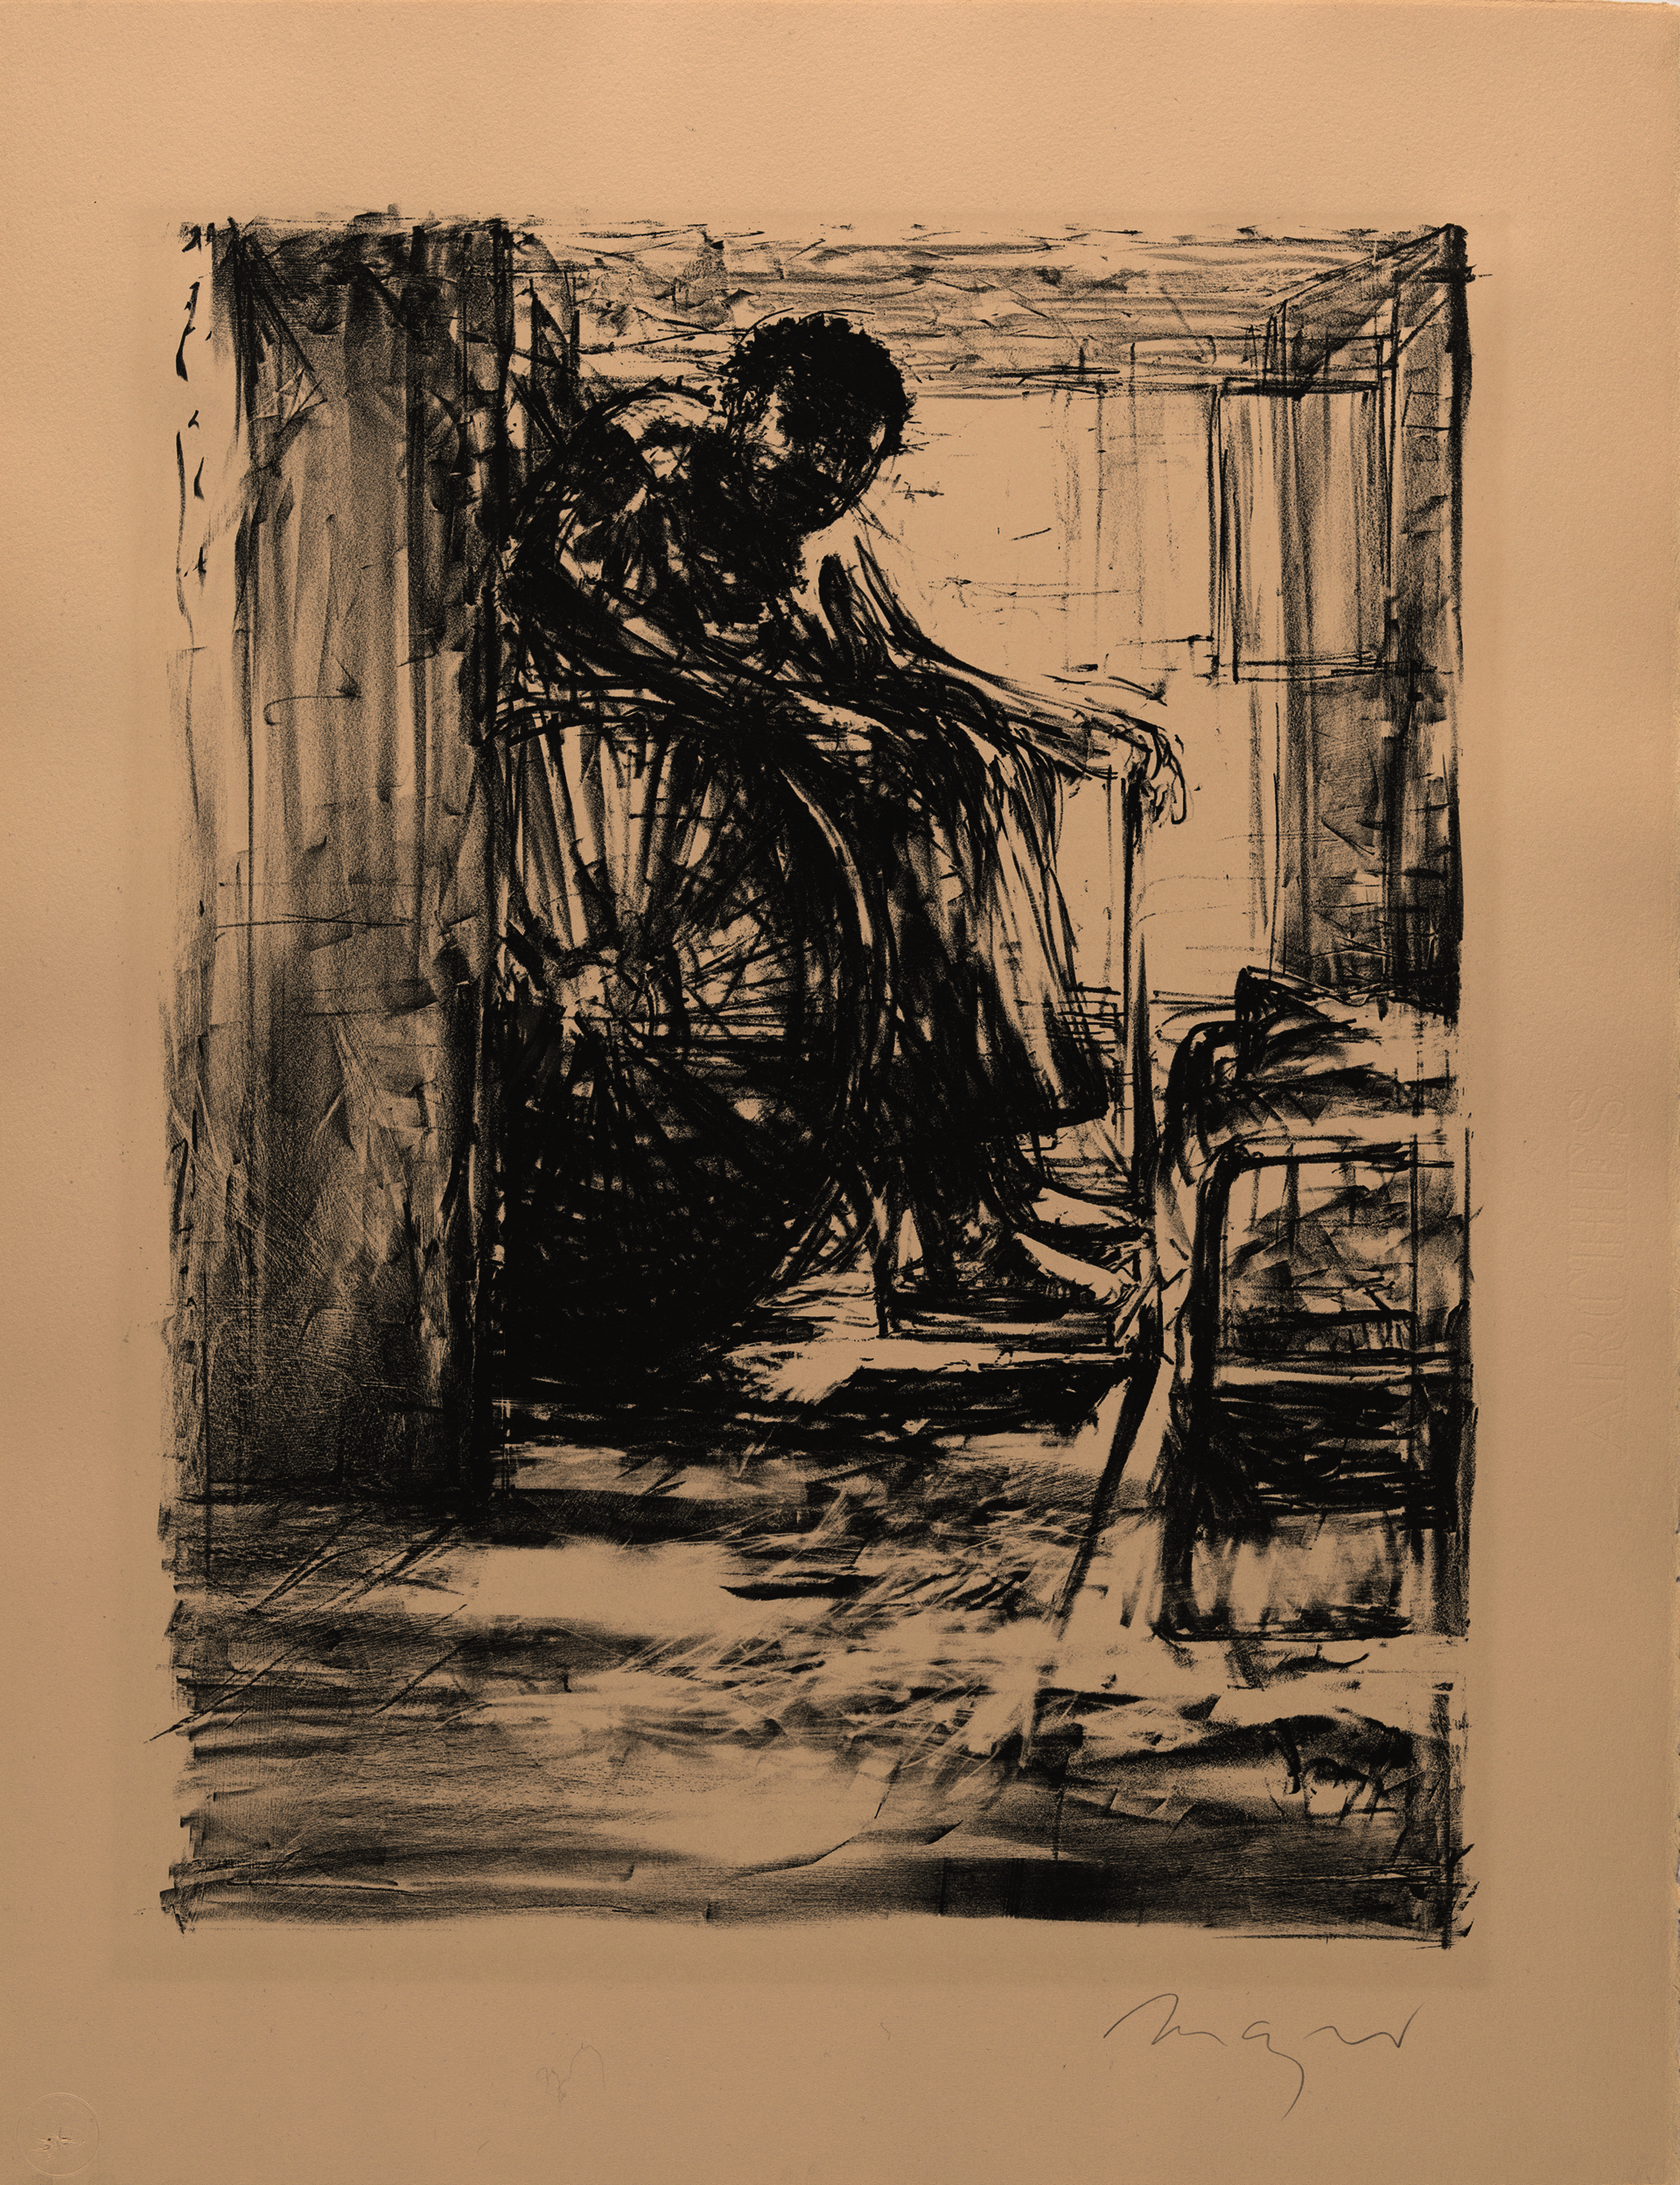 Rough, loose black lines depict a figure sitting in a wheelchair, leaning forward and holding a cane. They are situated in a tight space, possibly a hallway.